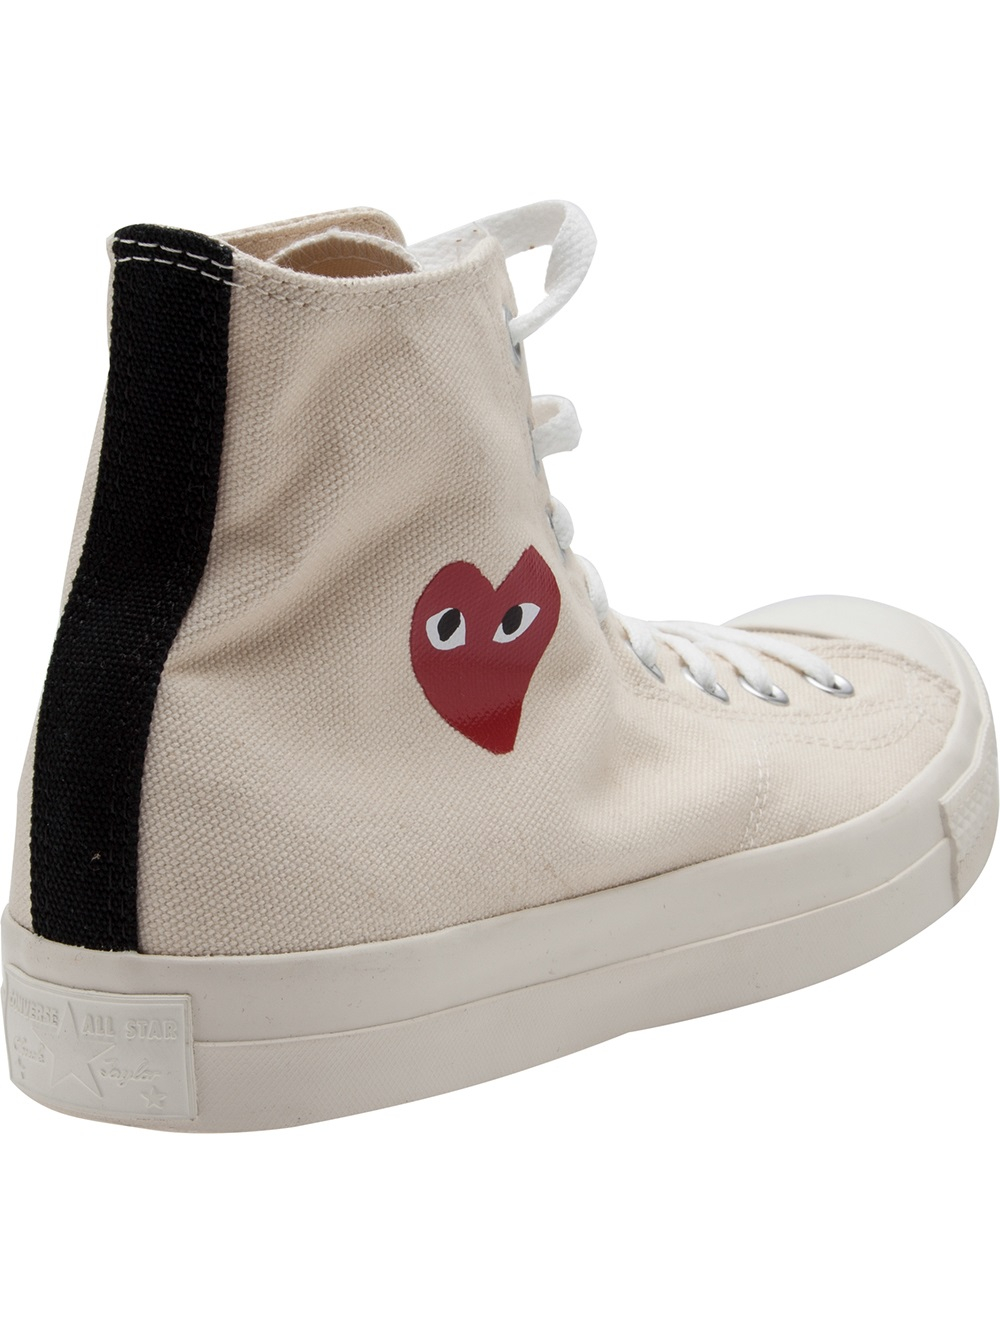 Download Play Comme des Garçons High Top Sneaker in White (Natural ...